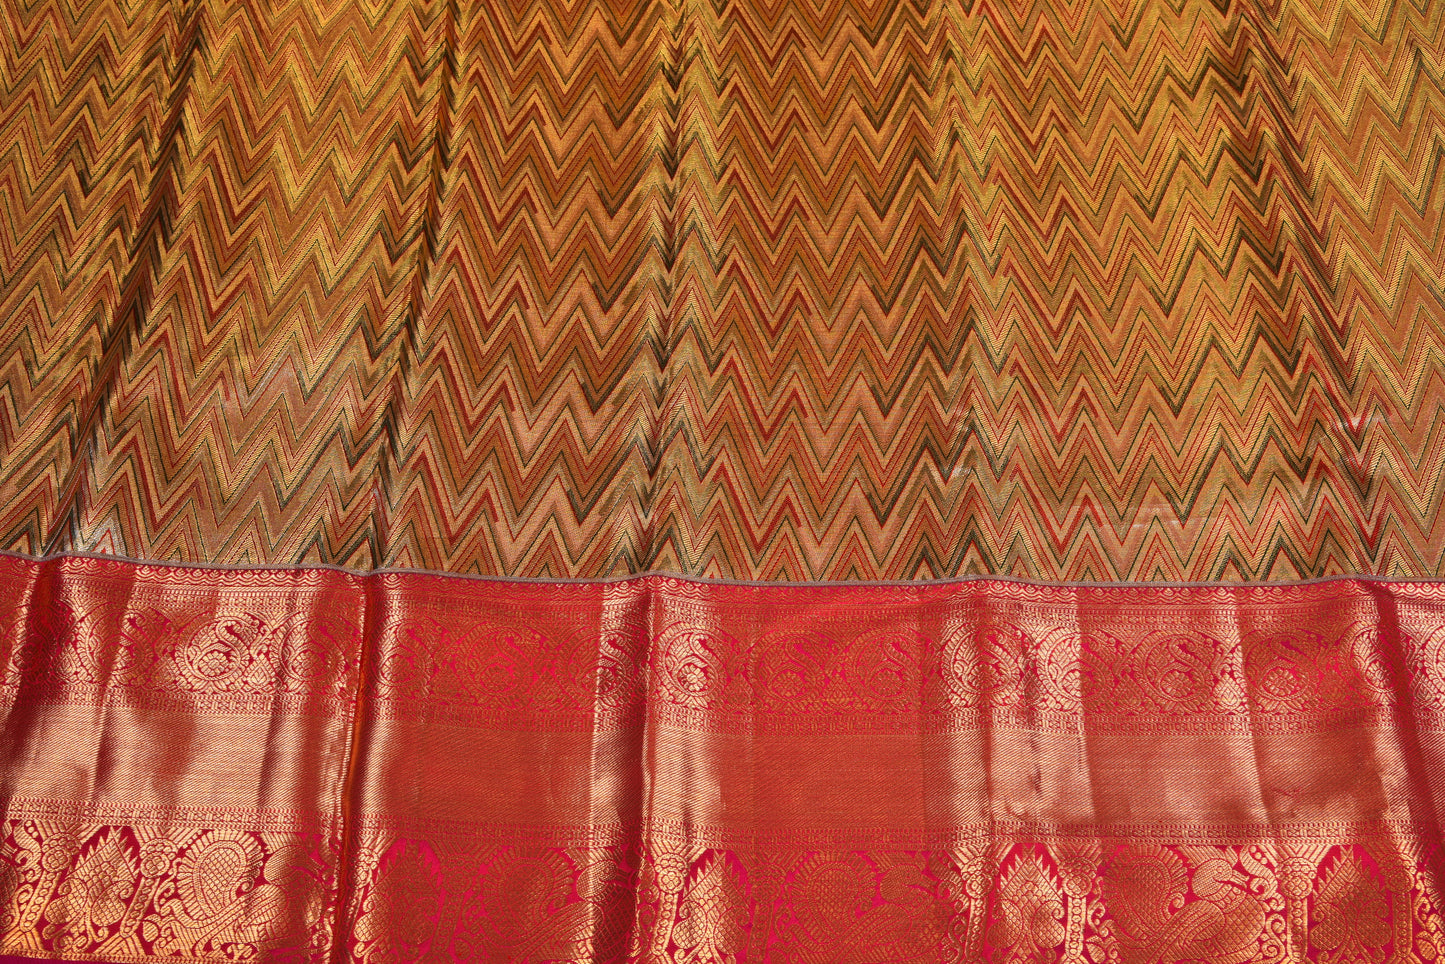 Golden zigzag pattern with contrast red border